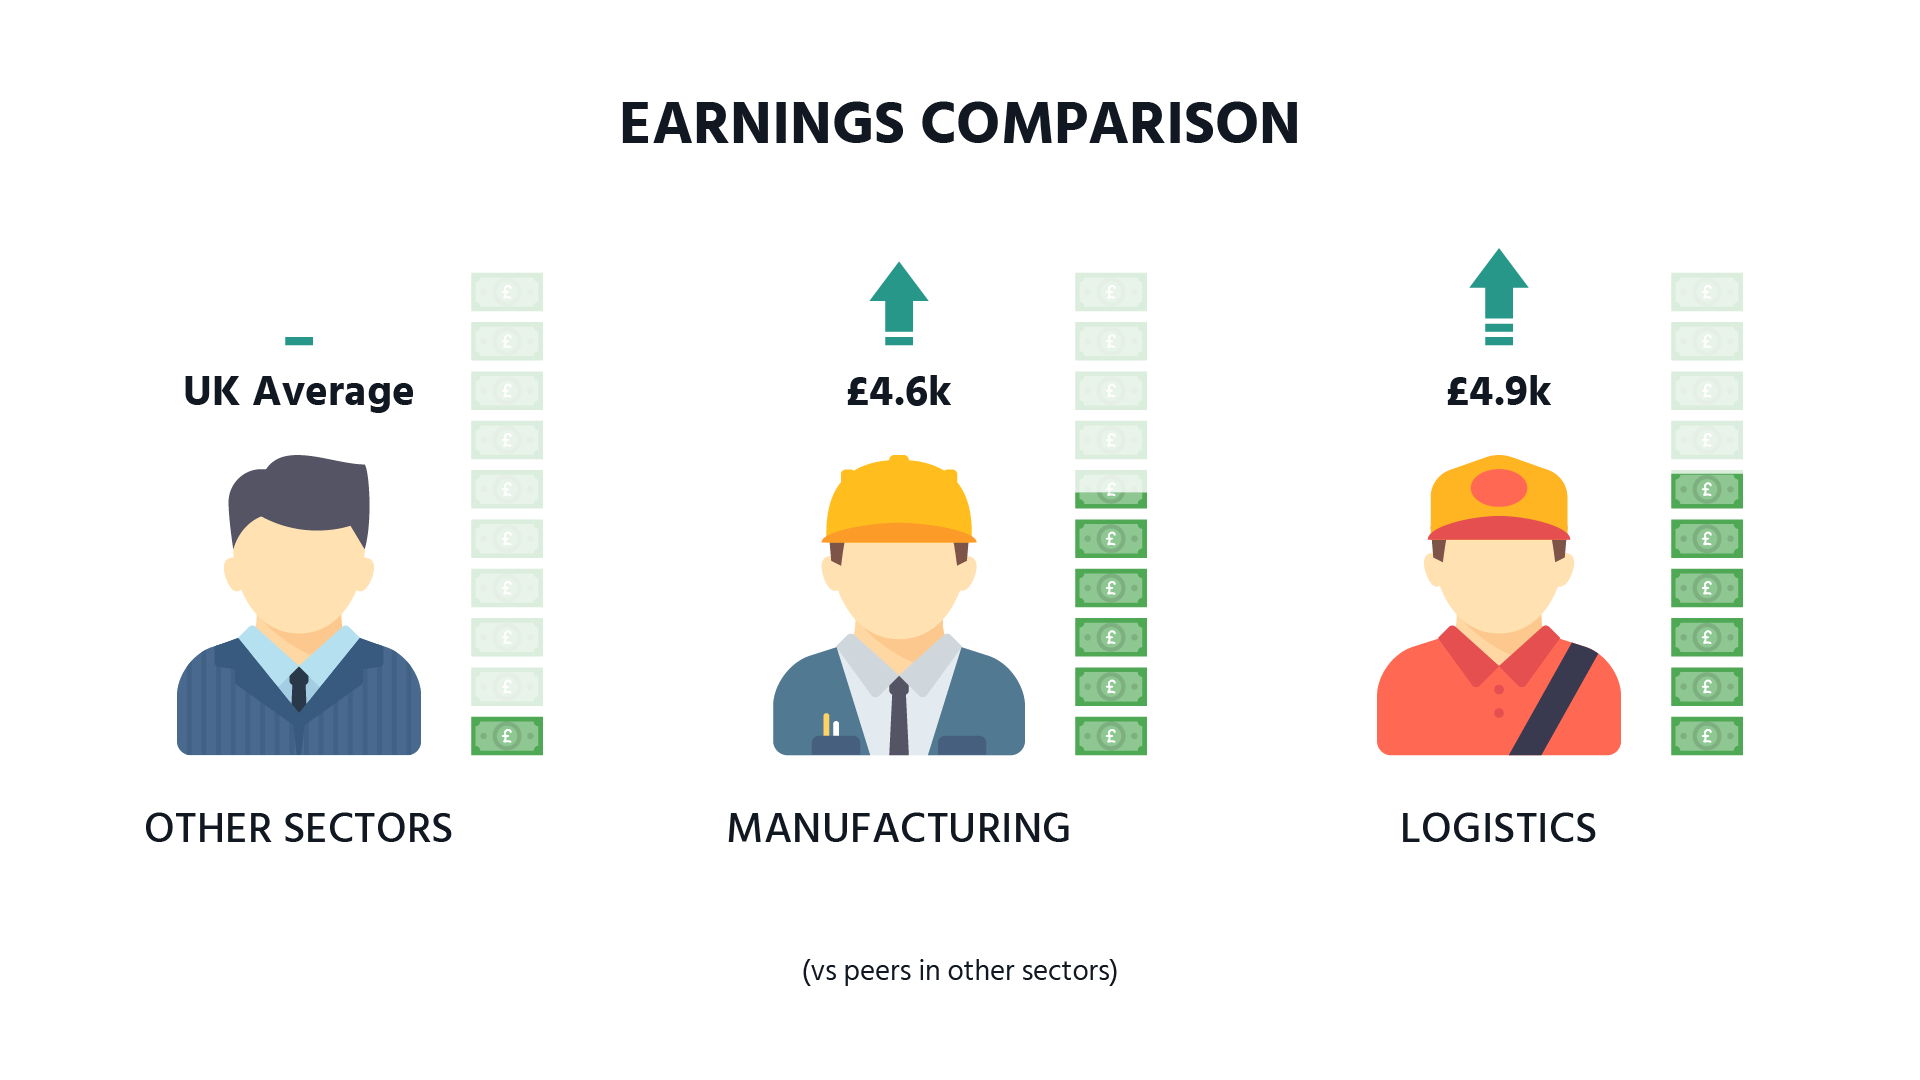 Levelling-Up-Logistics-Sector-Earnings-Comparison-Manufacturing-Logistics-Other-Sectors-Distribution